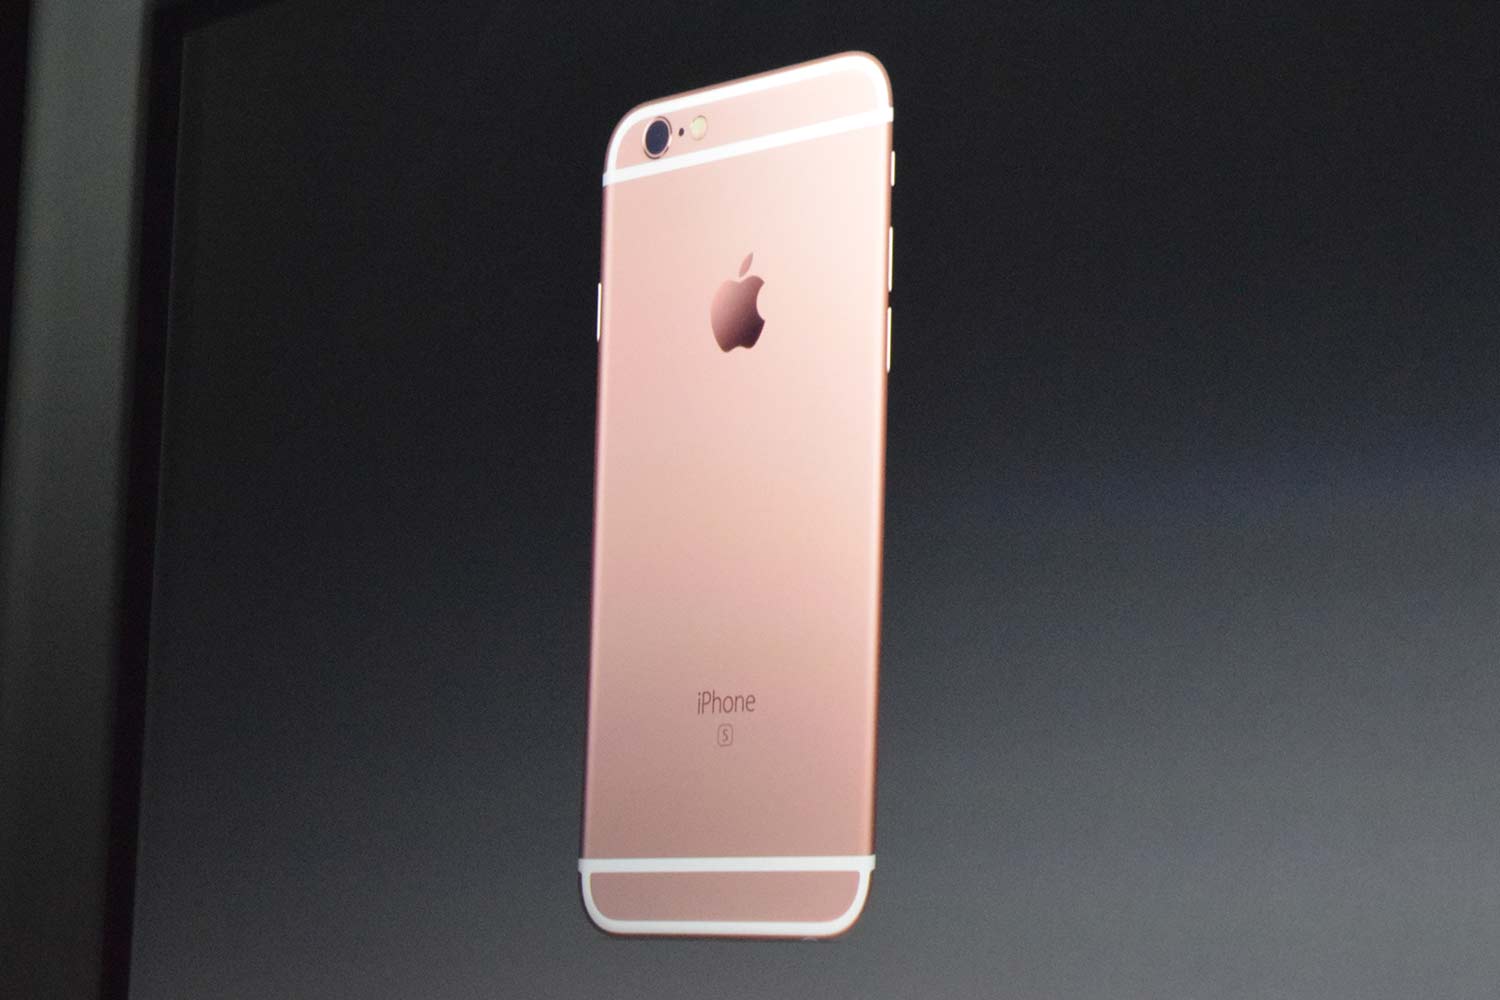 iPhone 6S News: Specs, Release Date, and Price | Digital Trends